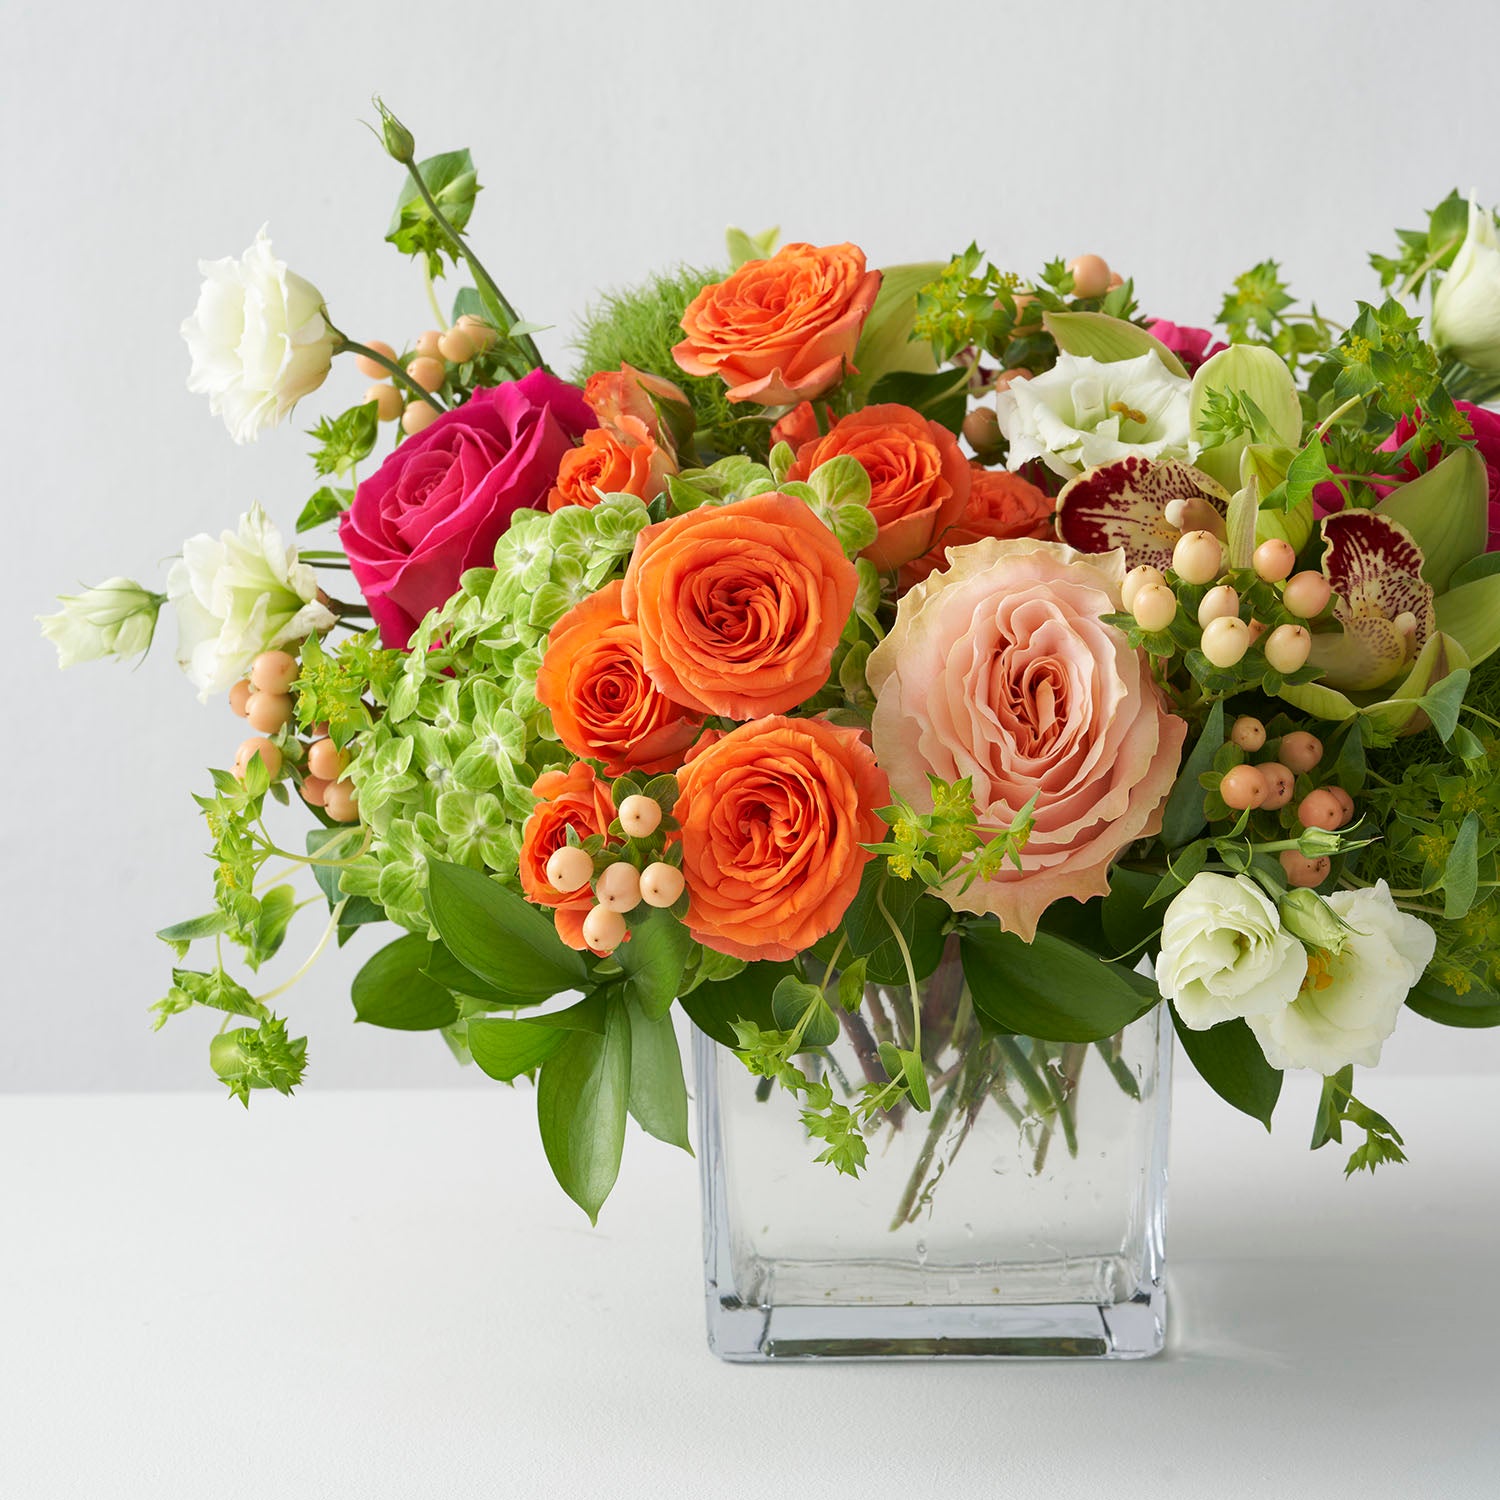 Arrangement of orange spray roses, lime green hydrangea, hot pink roses, peachy roses, and berries arranged in clear glass vase on white background.